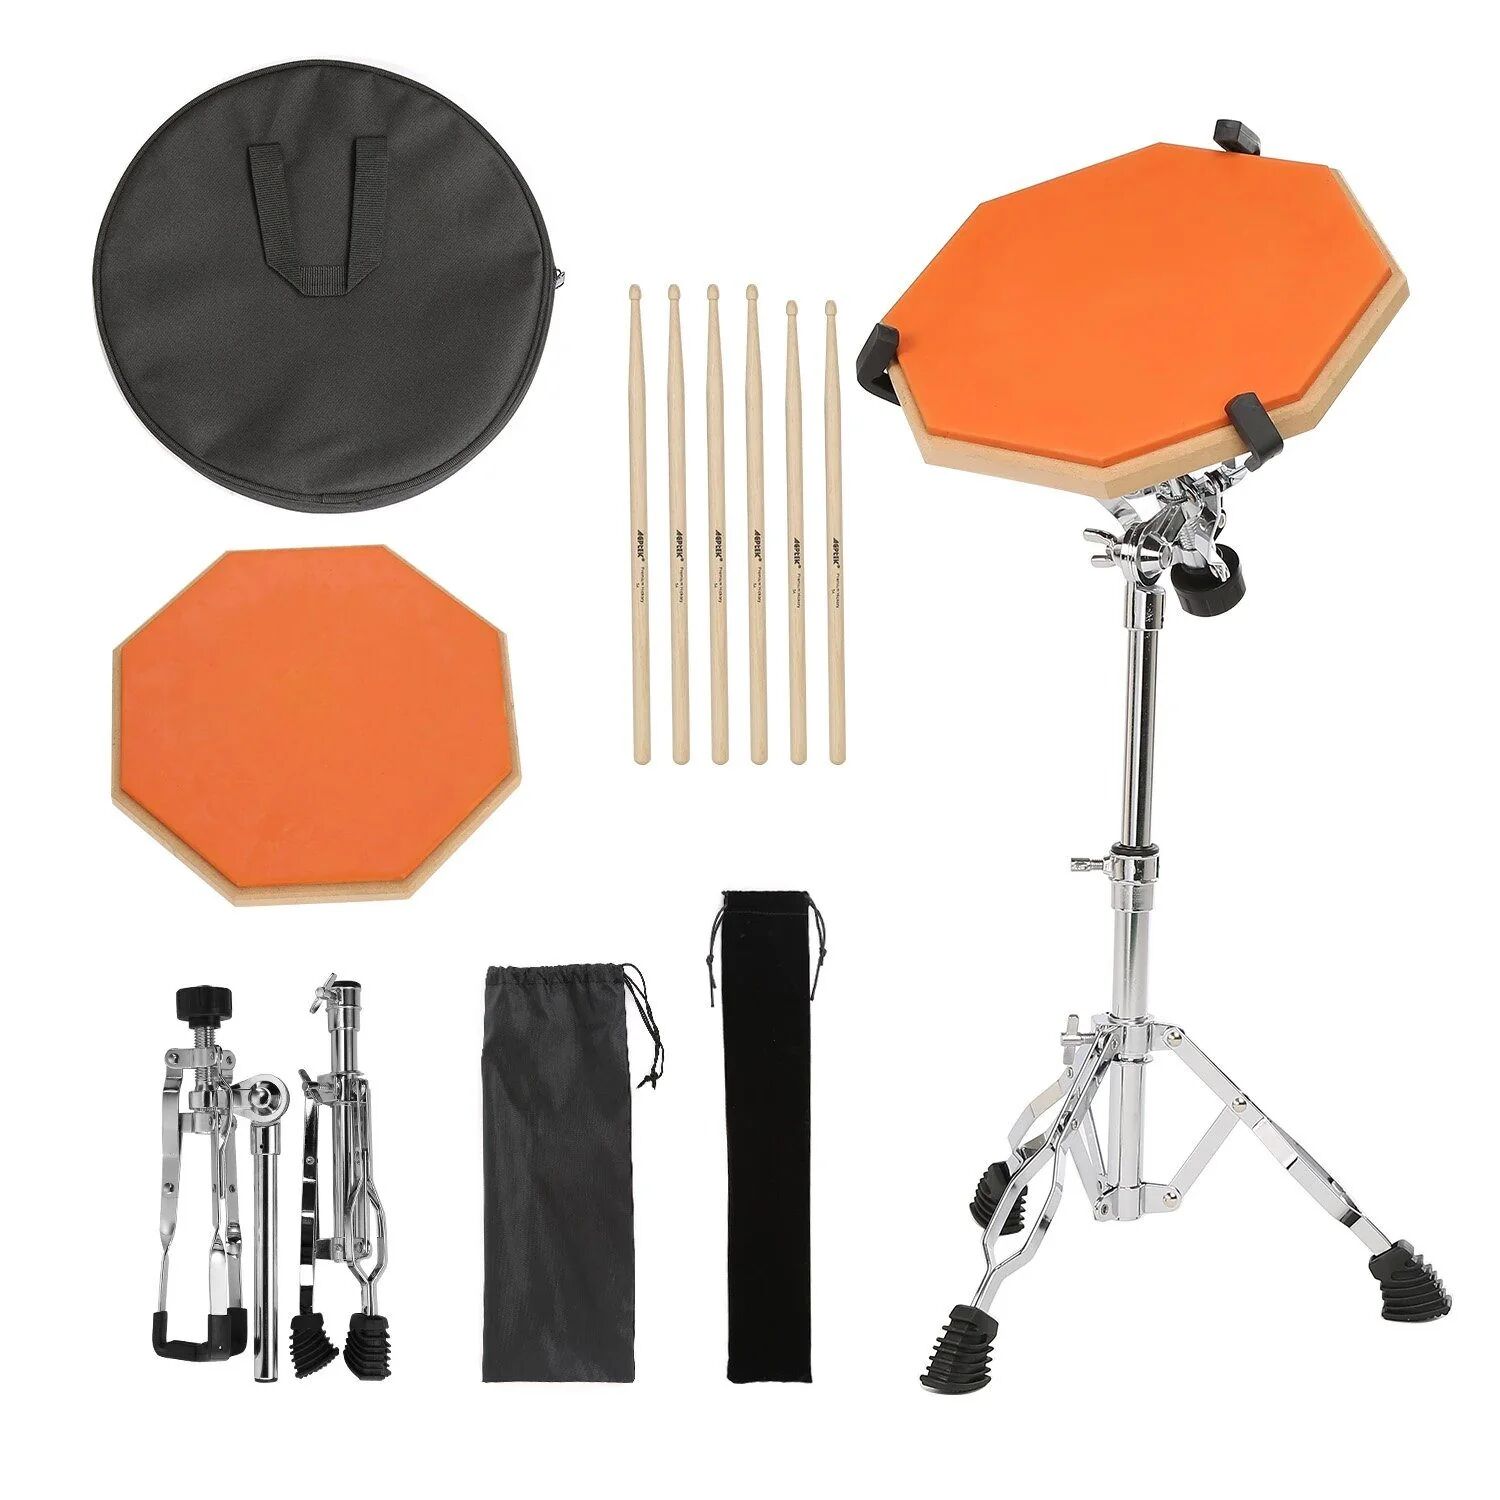 DailySale Drum Practice Pads with 3 Pairs of Drum Sticks and Adjustable Snare Drum Stand